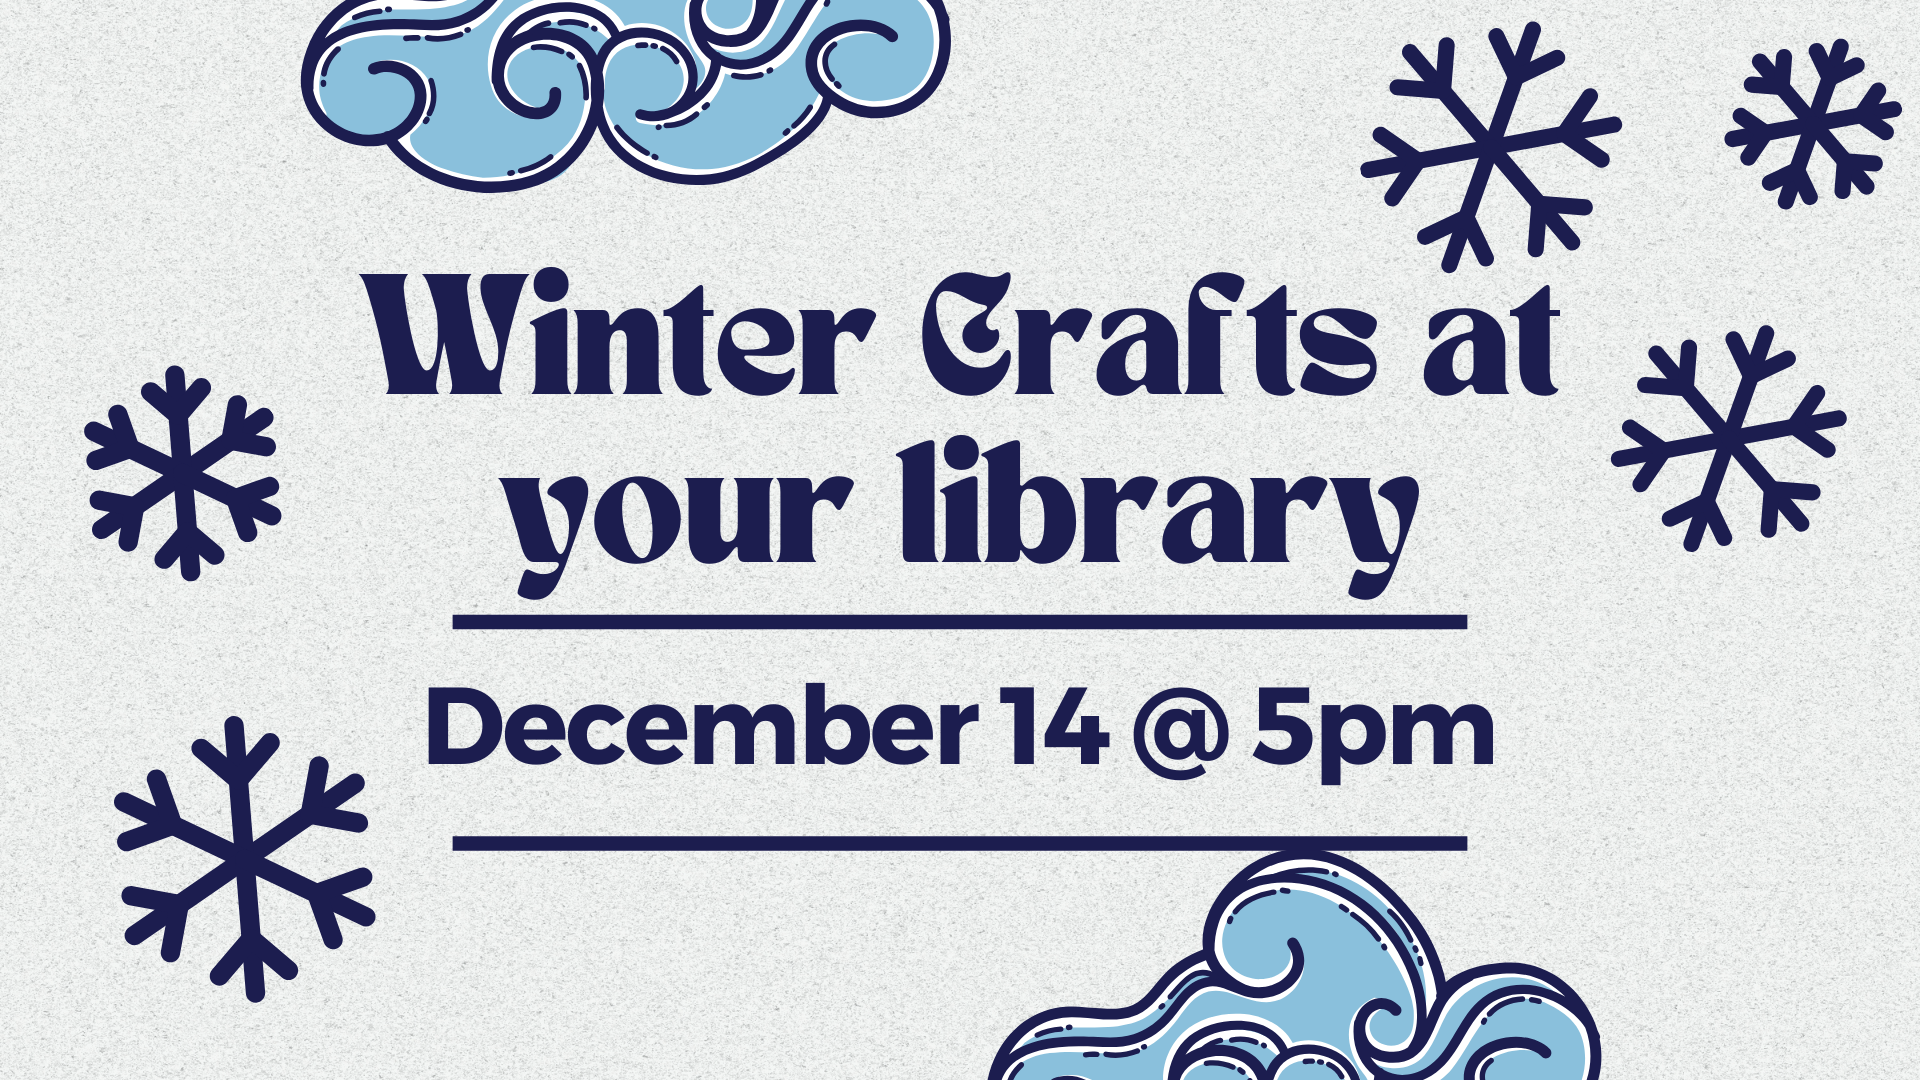 Library program flyer advertising winter crafts for library patrons.